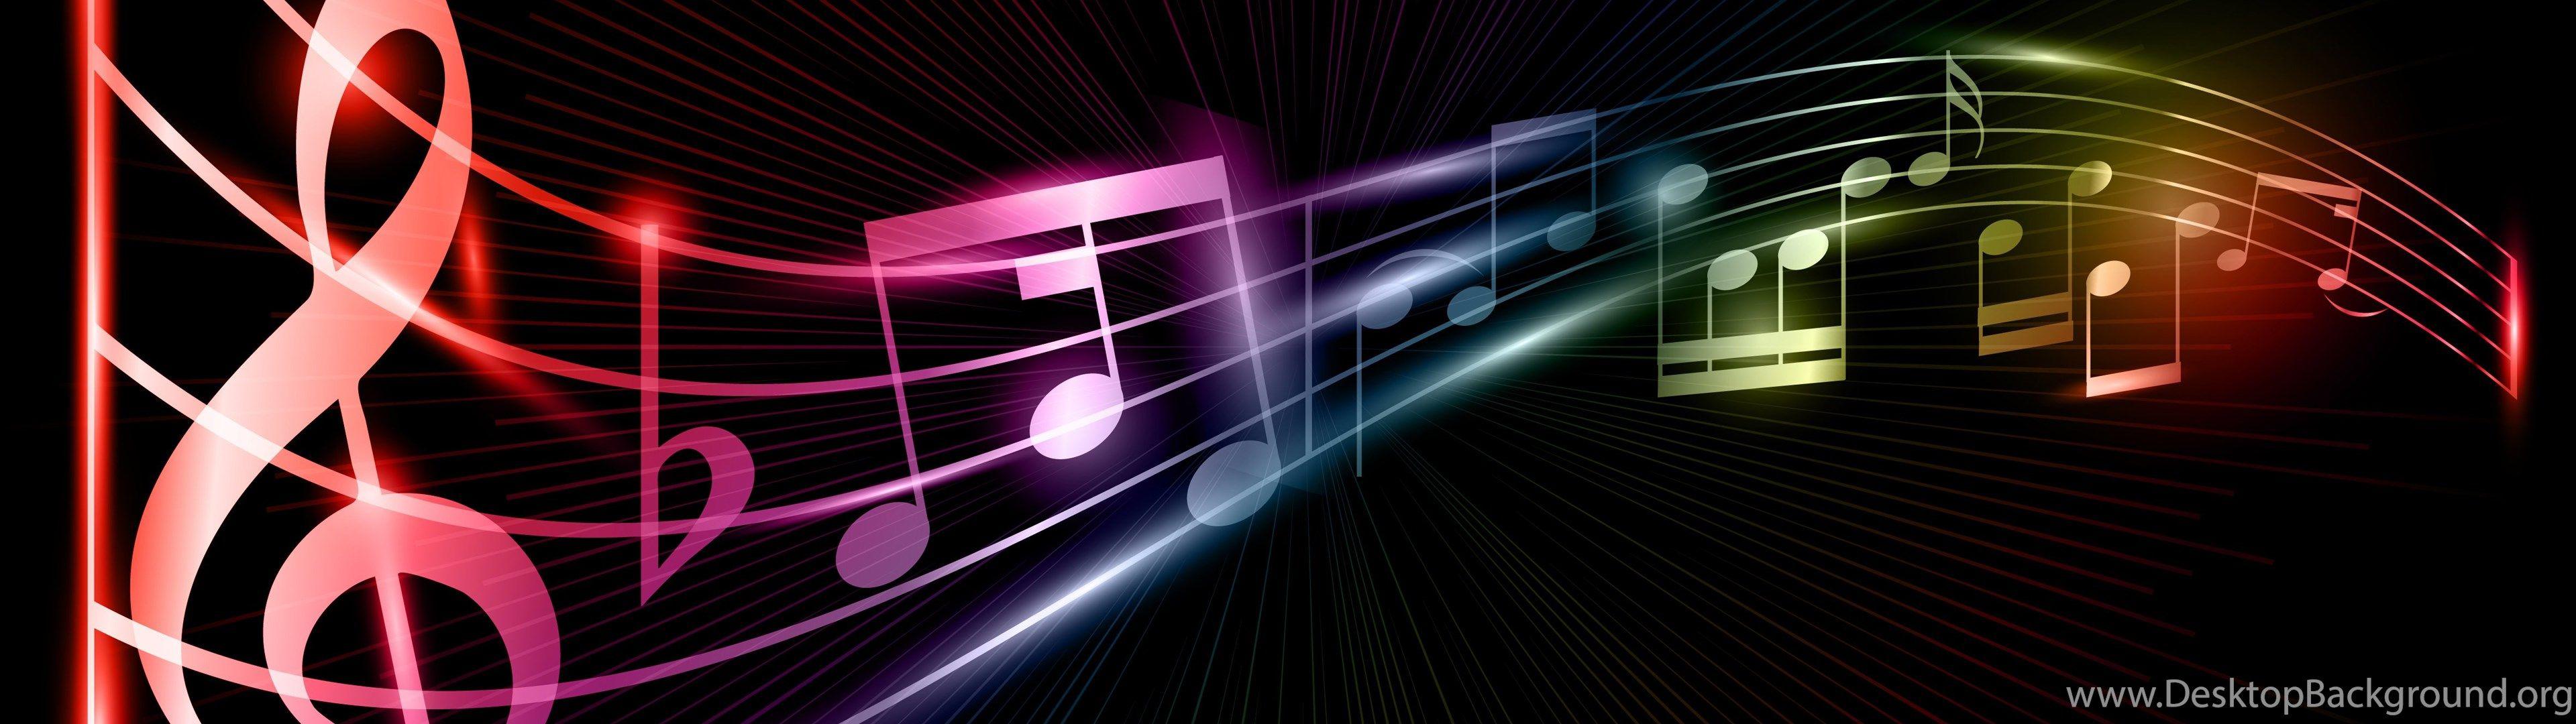 Rainbow Music Wallpapers - Top Free Rainbow Music Backgrounds ...